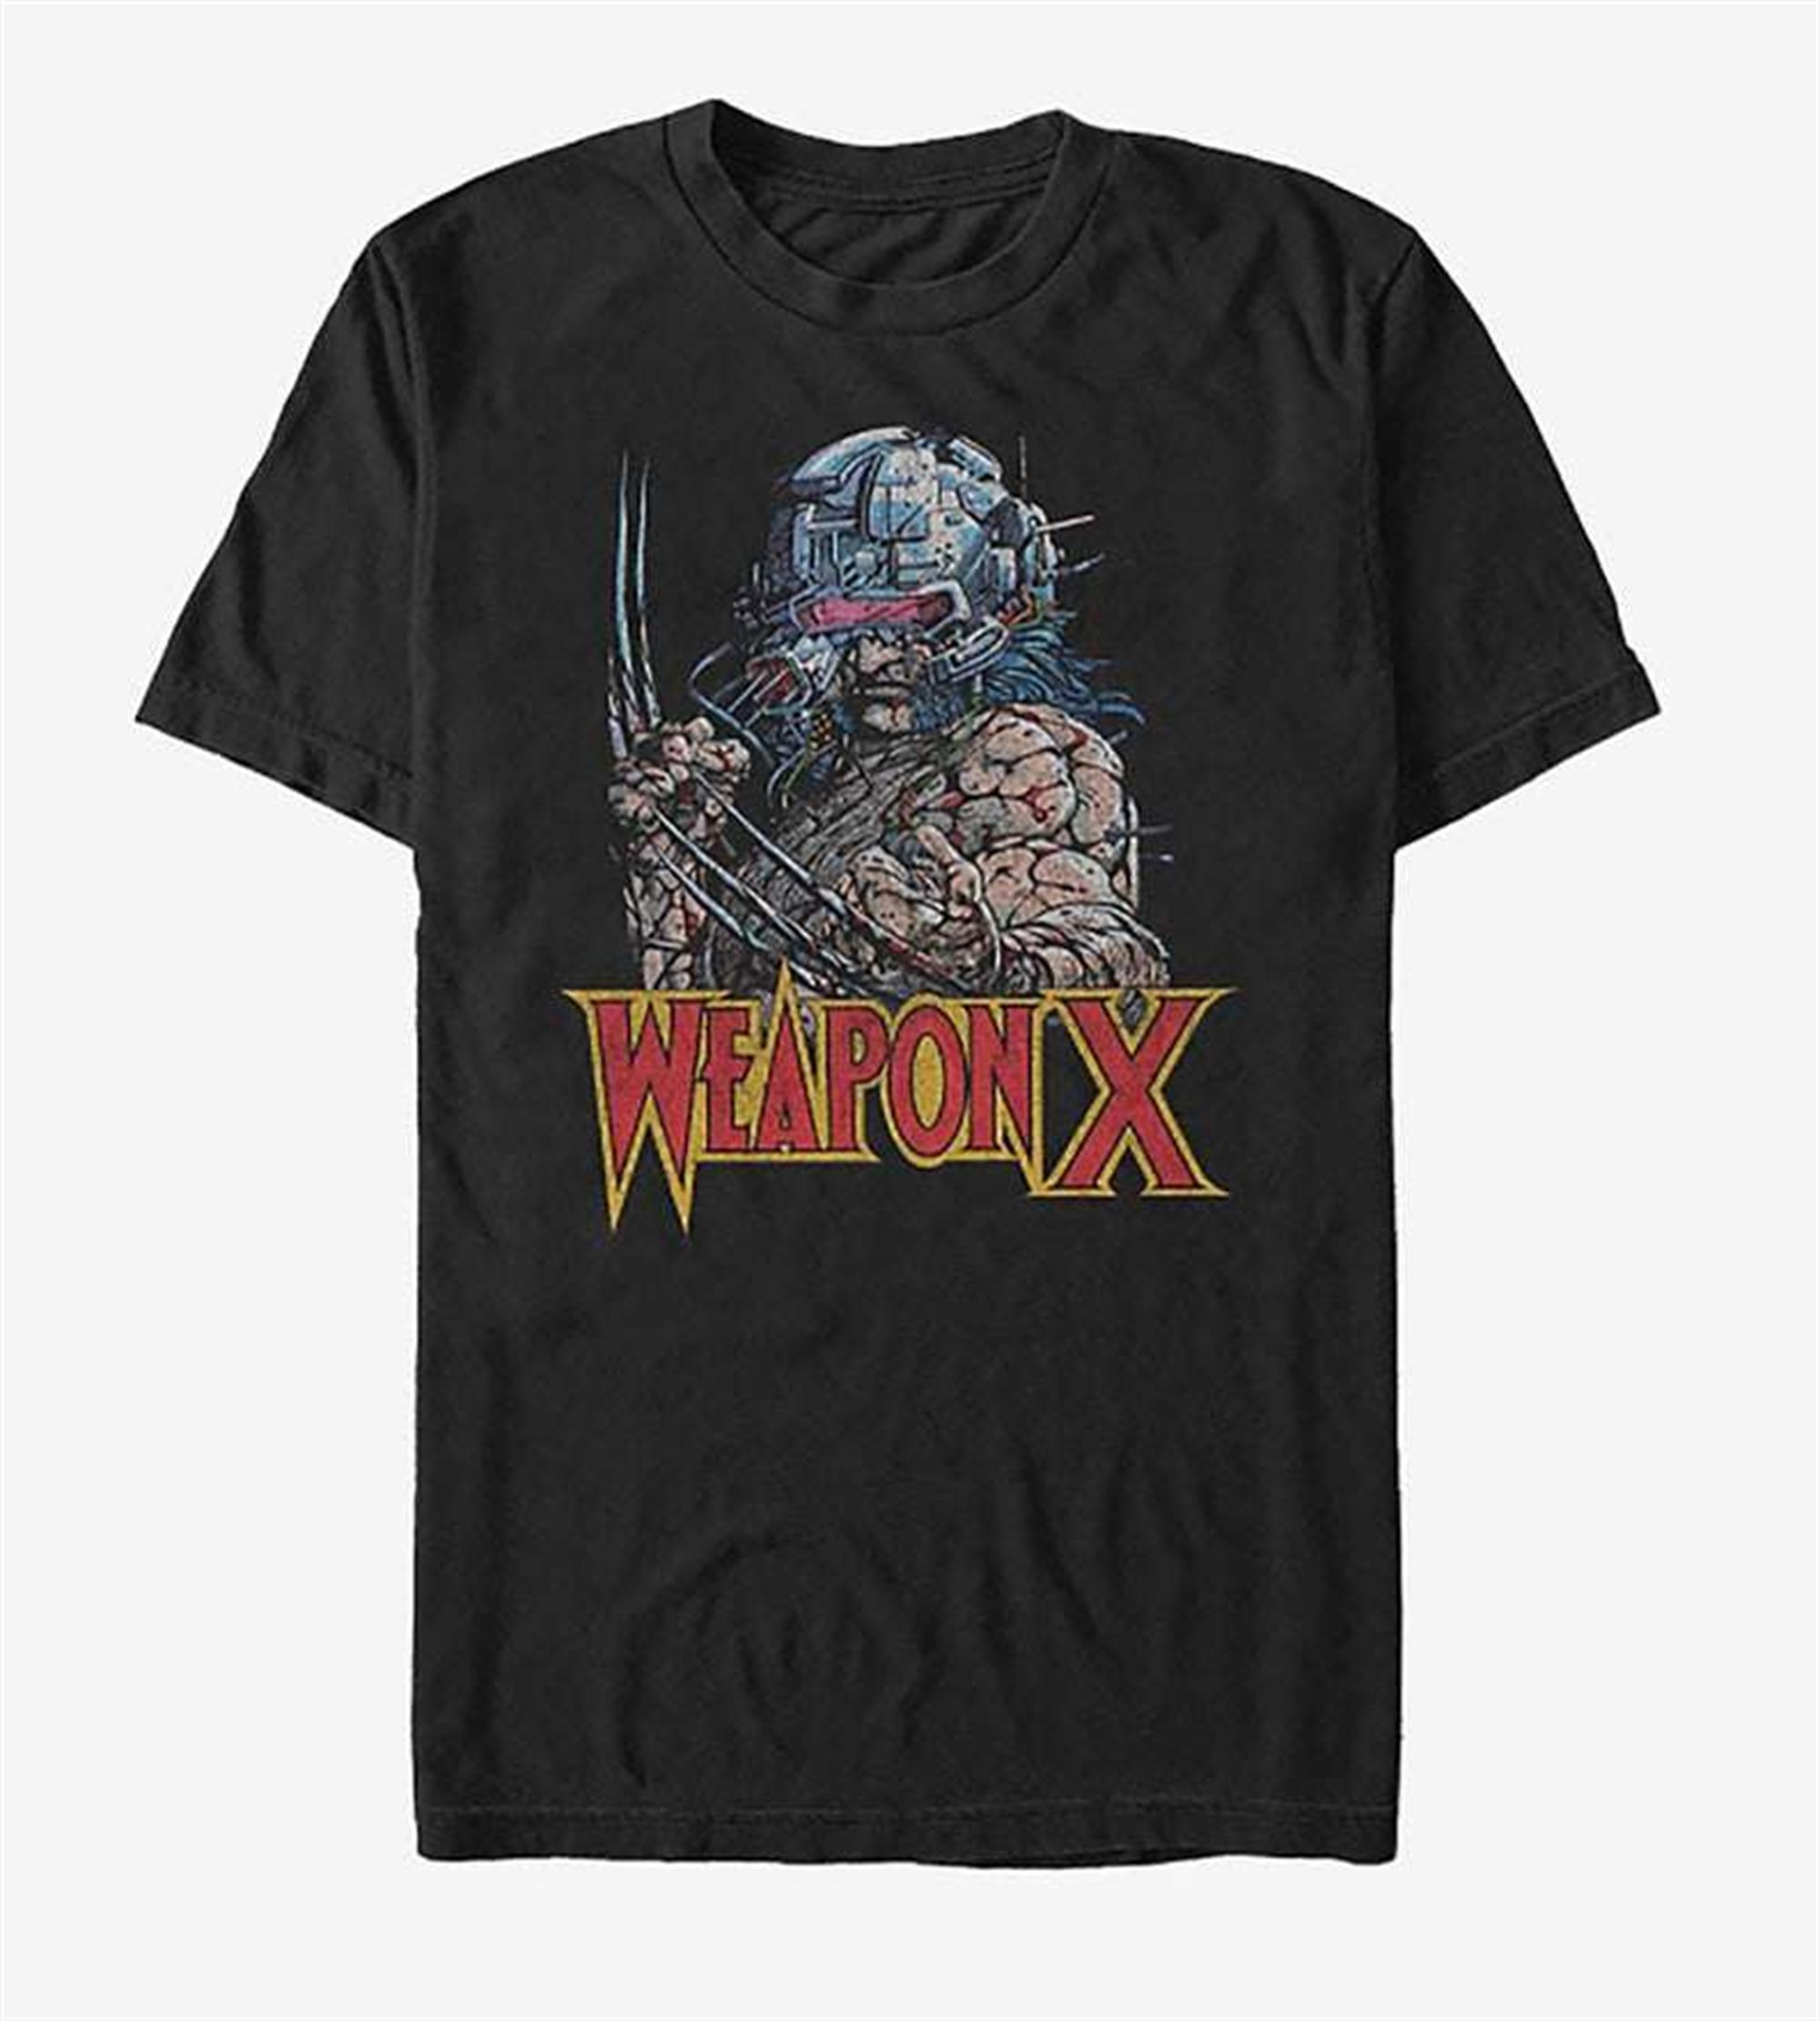 Wolverine Weapon X Marvel T Shirt Plus Size Up To 5x